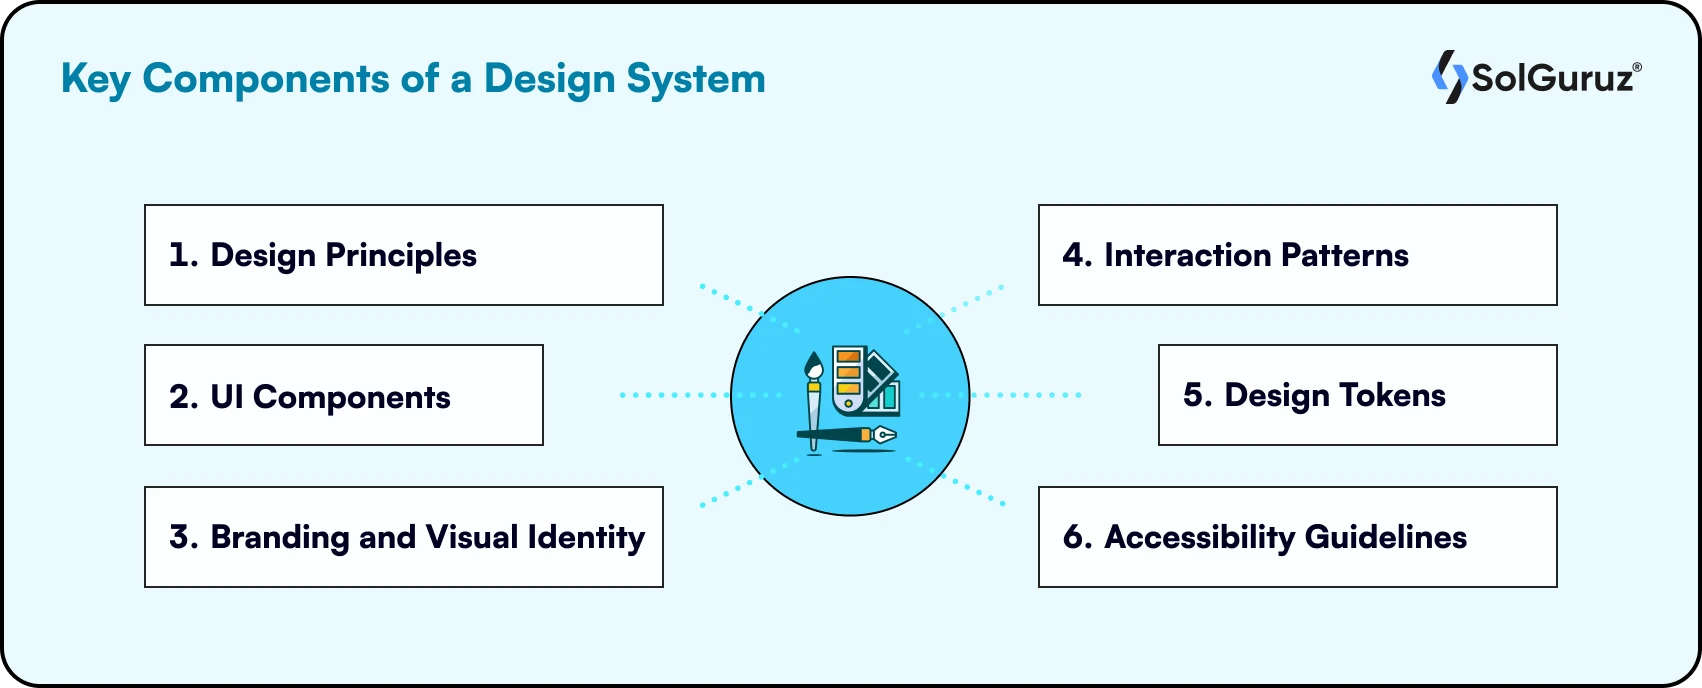 Key Components of a Design System